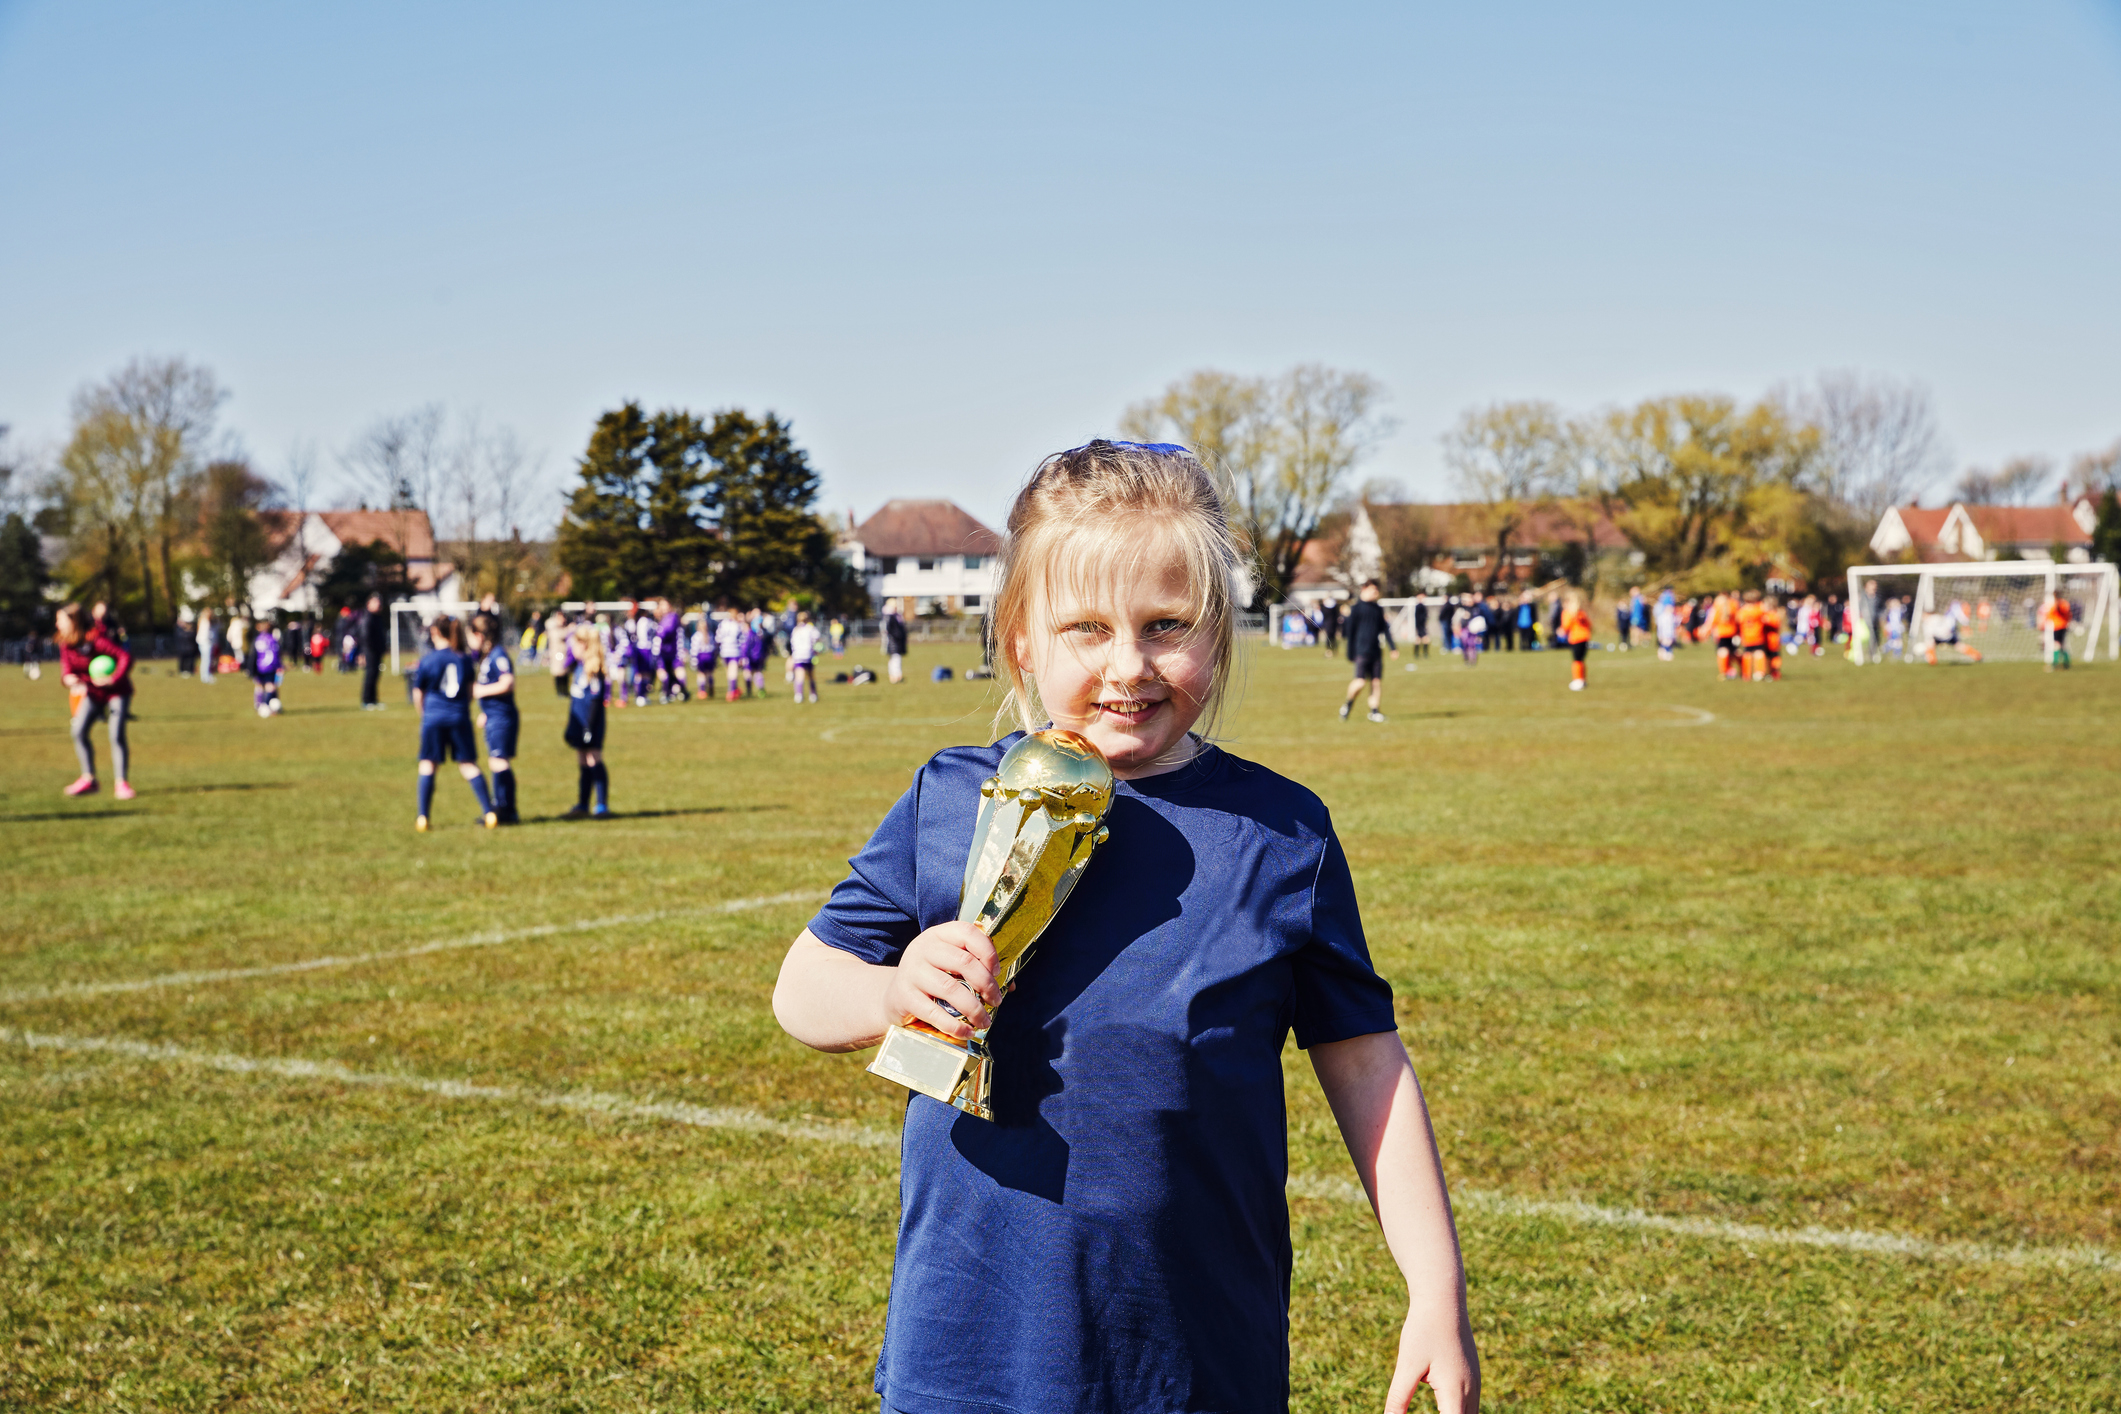 Child holding a trophy on a soccer field with players in the background